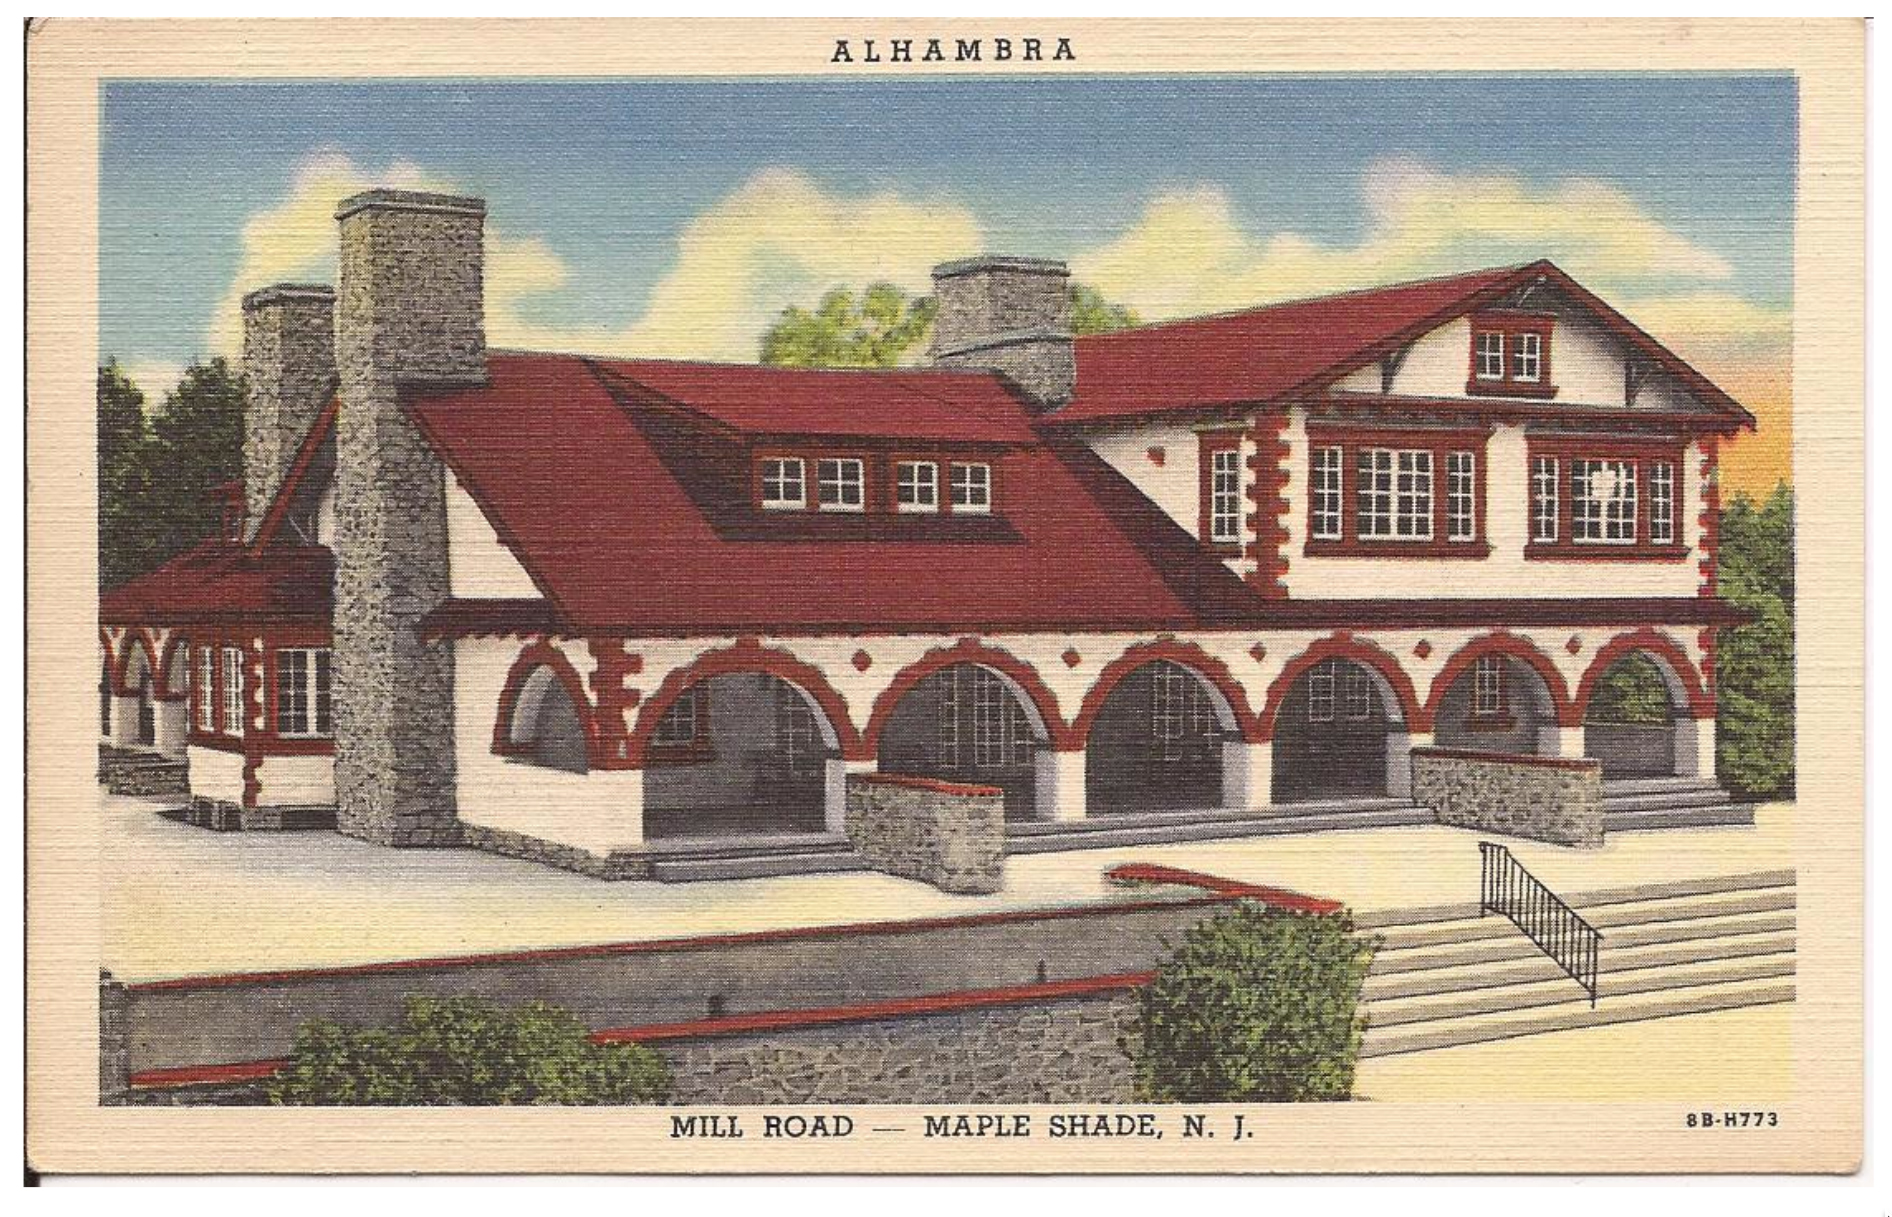 Maple Shade - The Ahabra Restaurant  on Mill Road - 1930s-40s